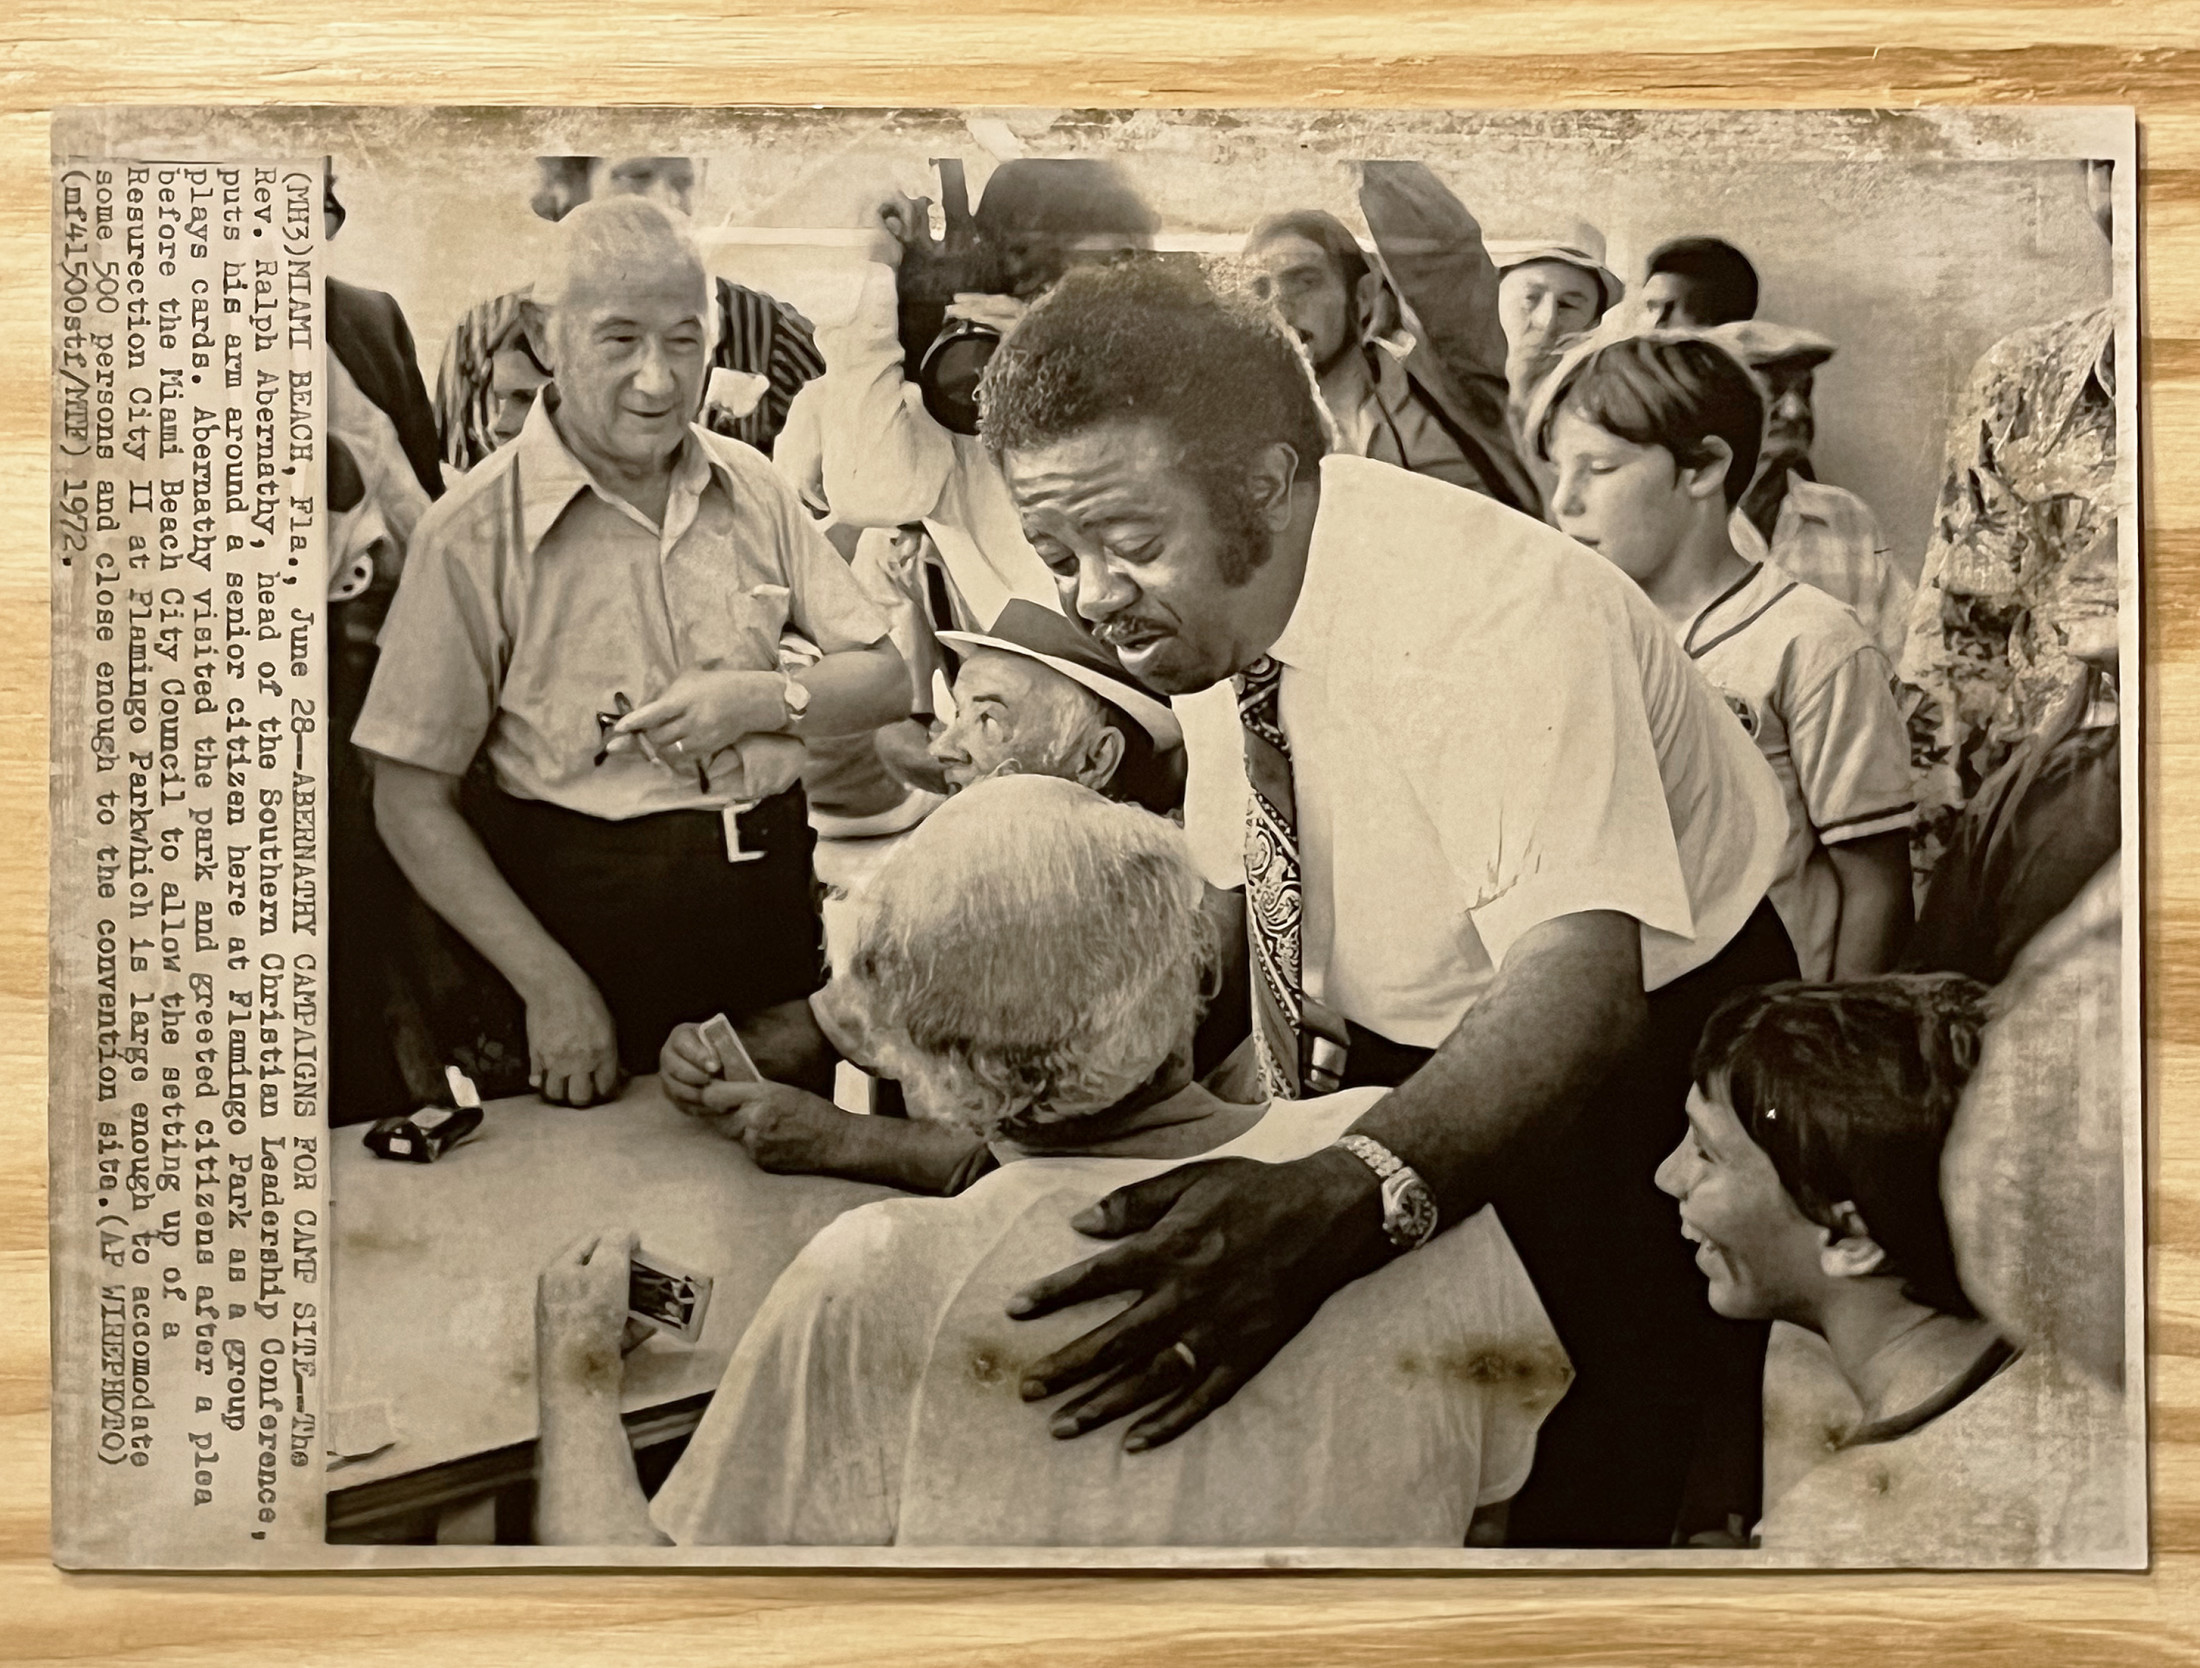 Found press photograph, caption reads:
MIAMI BEACH, Fla., June 28–ABERNETHY CAMPAIGNS FOR CAMP SITE–The Rev. Ralph Abernathy, head of the Southern Christian Leadership Conference, puts his arm around a senior citizen here at Flamingo Park as a group plays cards. Abernethy visited the park and greeted citizens after a plea before the Miami Beach City Council to allow the setting up of a Resurrection City II at Flamingo Park which is large enough to accomodate some 50 persons and close enough to the convention site. (AP WIREPHOTO) 1972.
